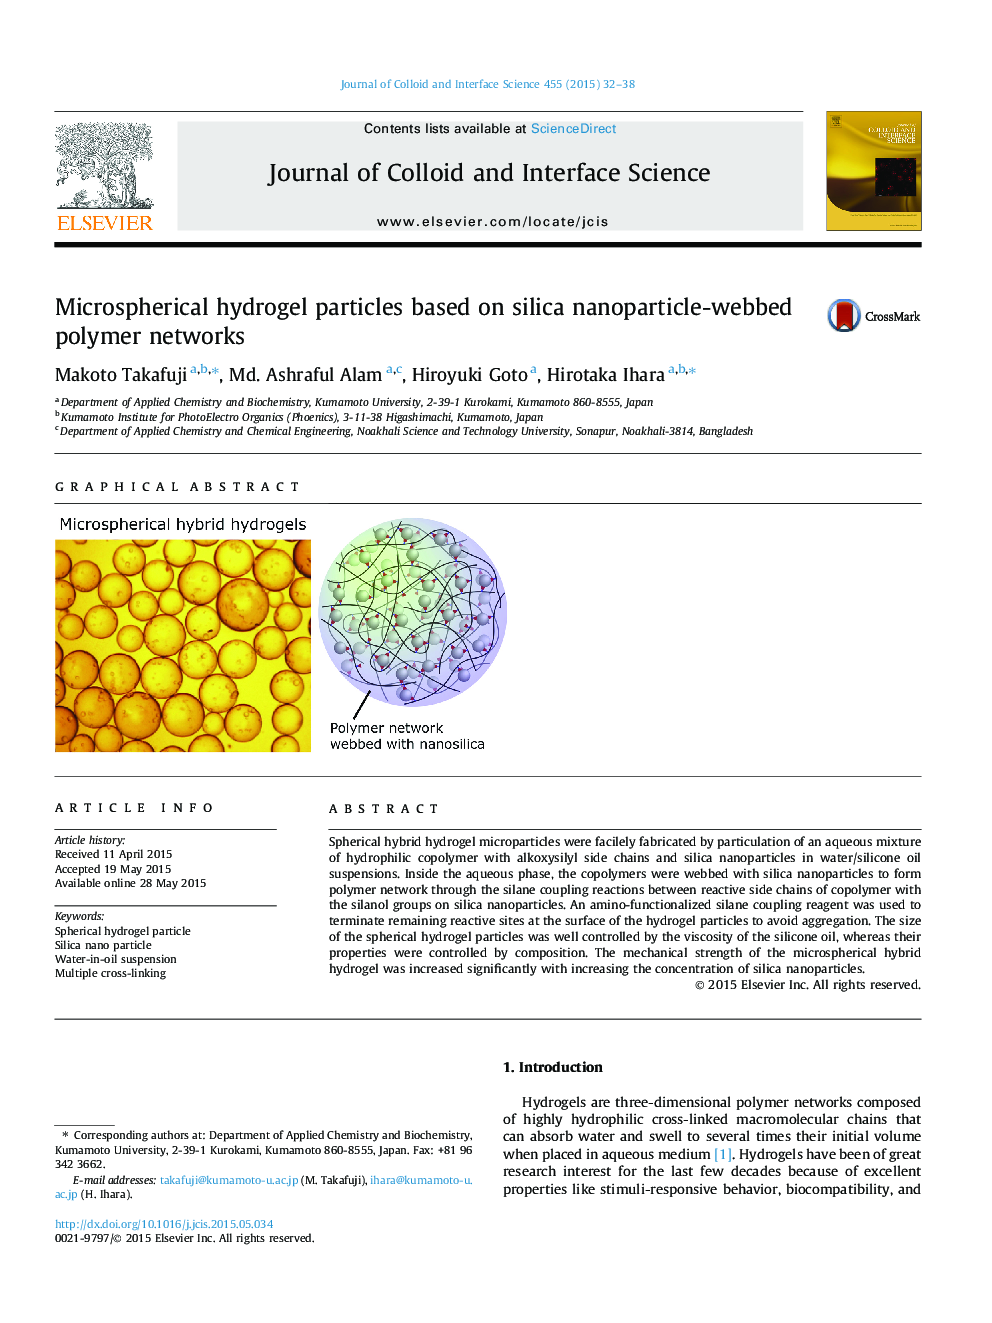 Microspherical hydrogel particles based on silica nanoparticle-webbed polymer networks